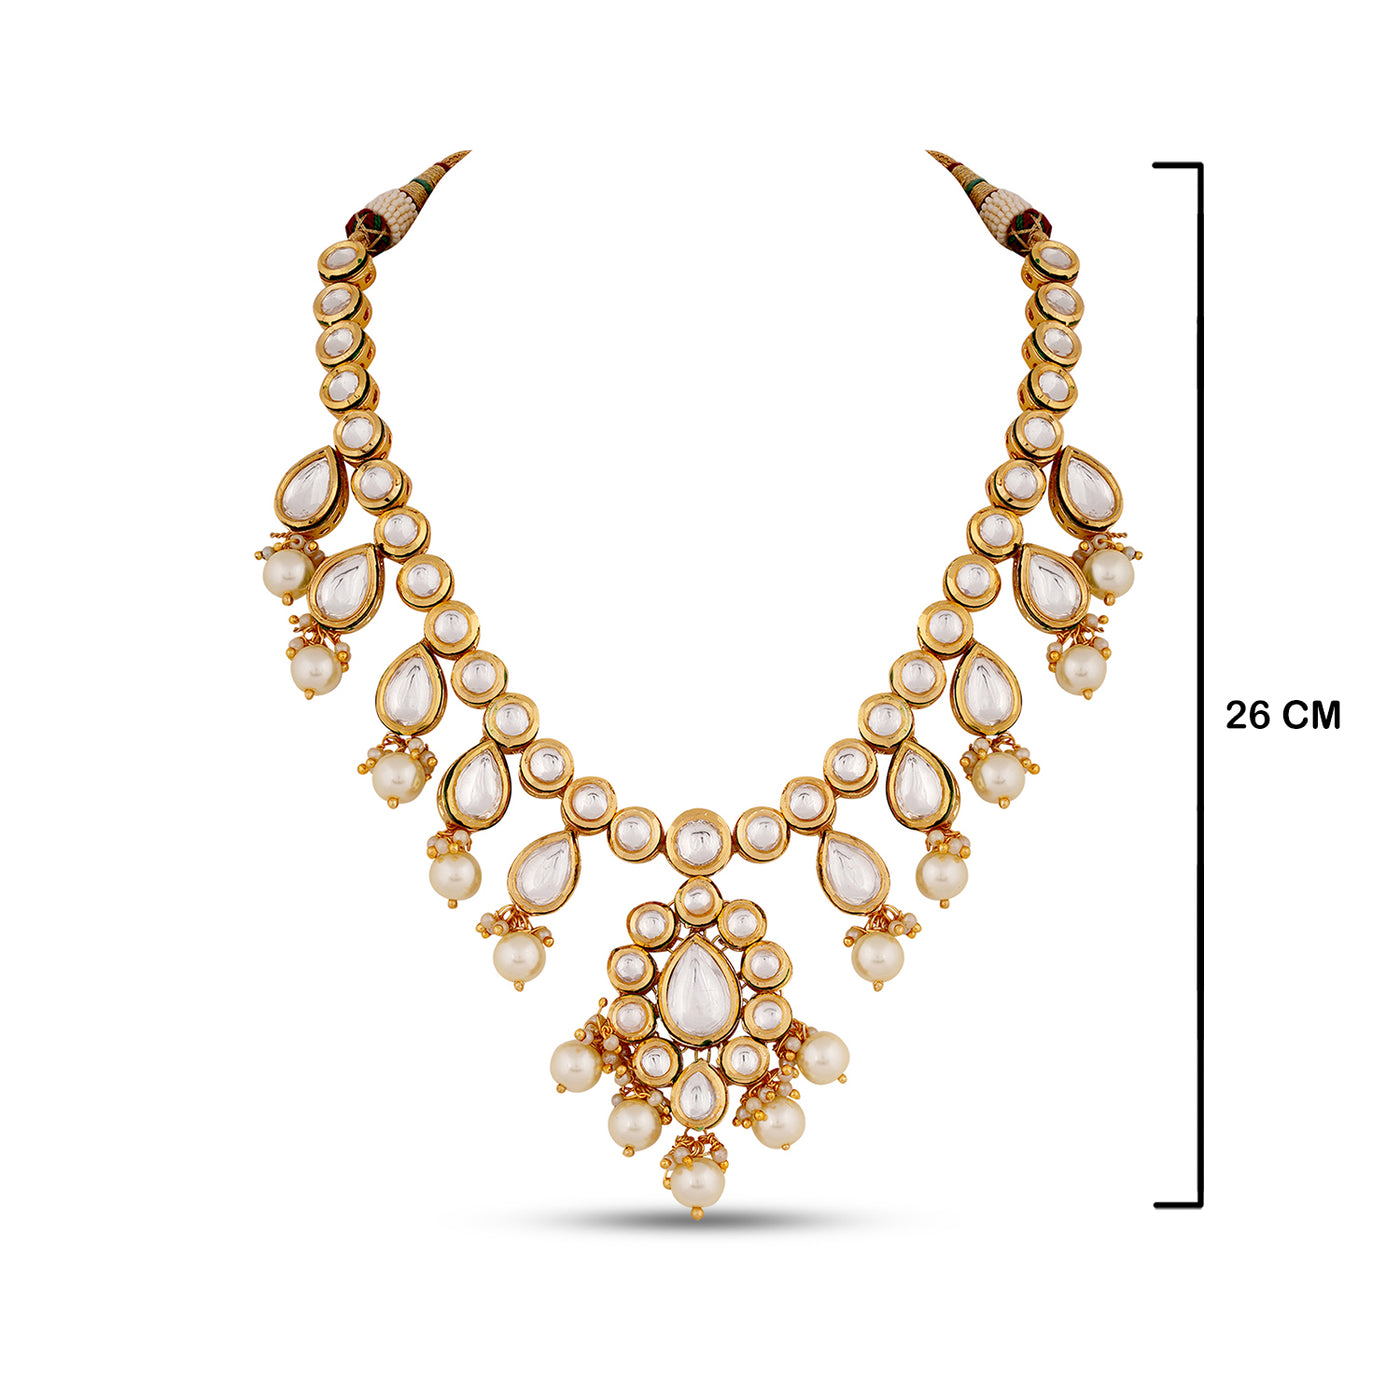 Kundan Polki Necklace Set with measurements in cm. 26cm in height.